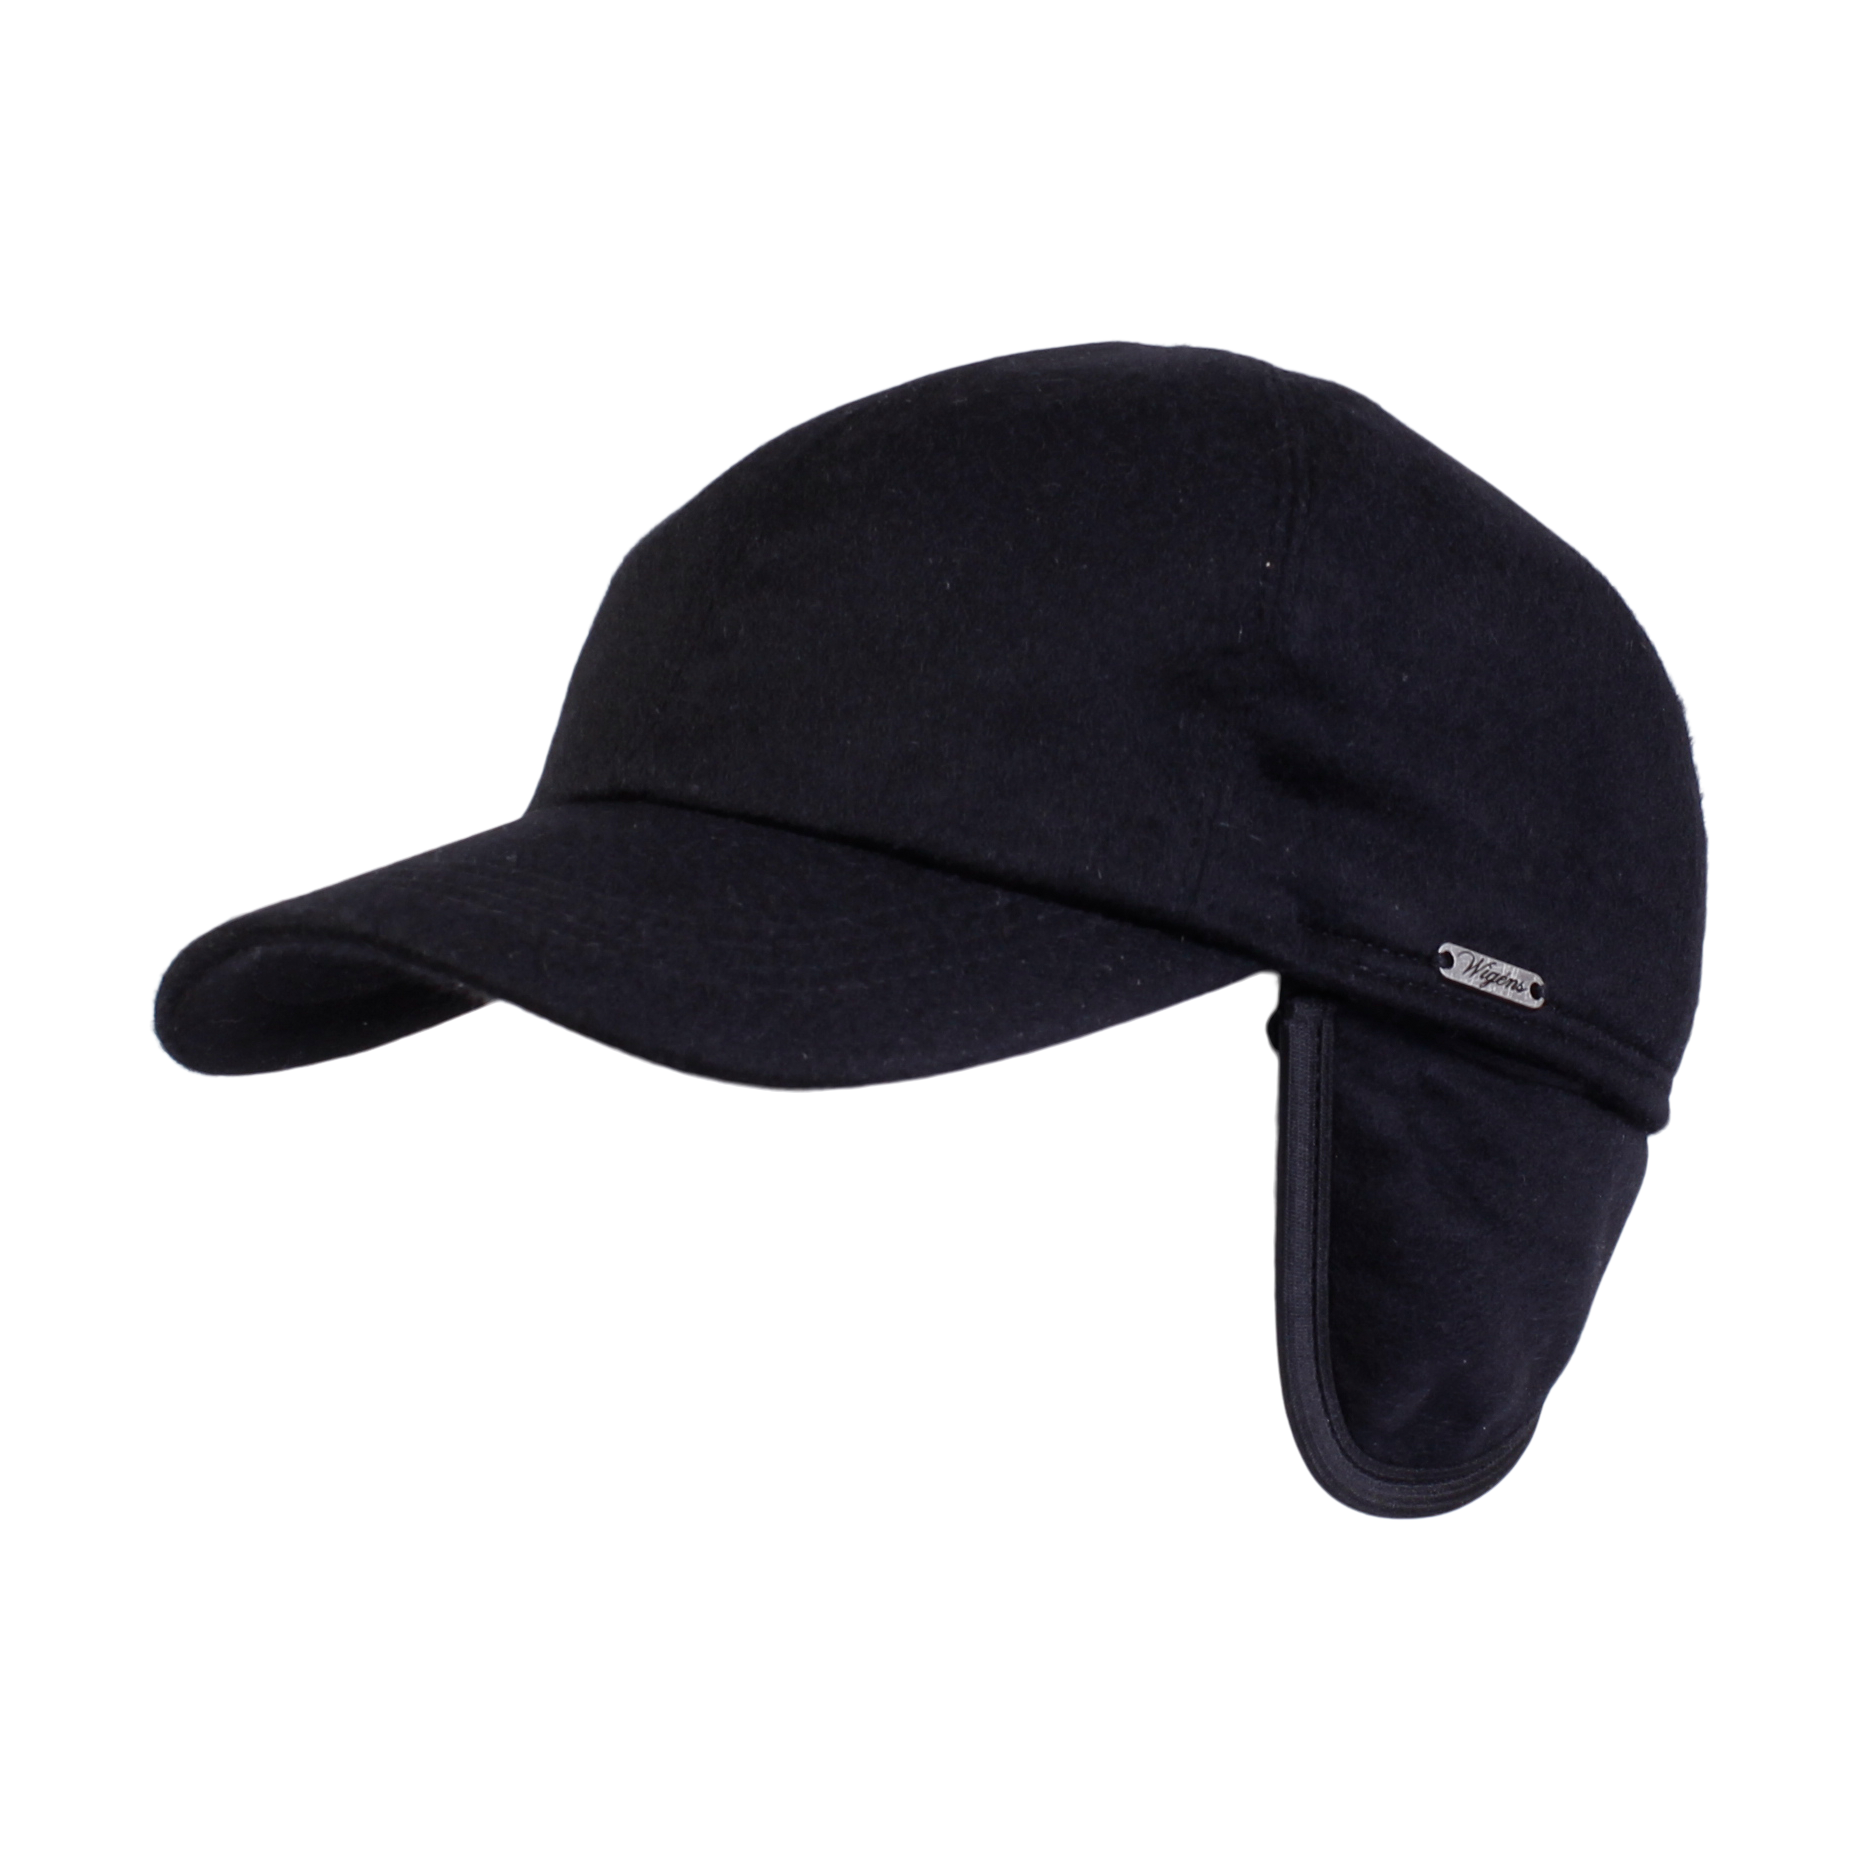 Baseball Classic Cap with Earflaps in Cashmere (Choice of Colors) by Wigens